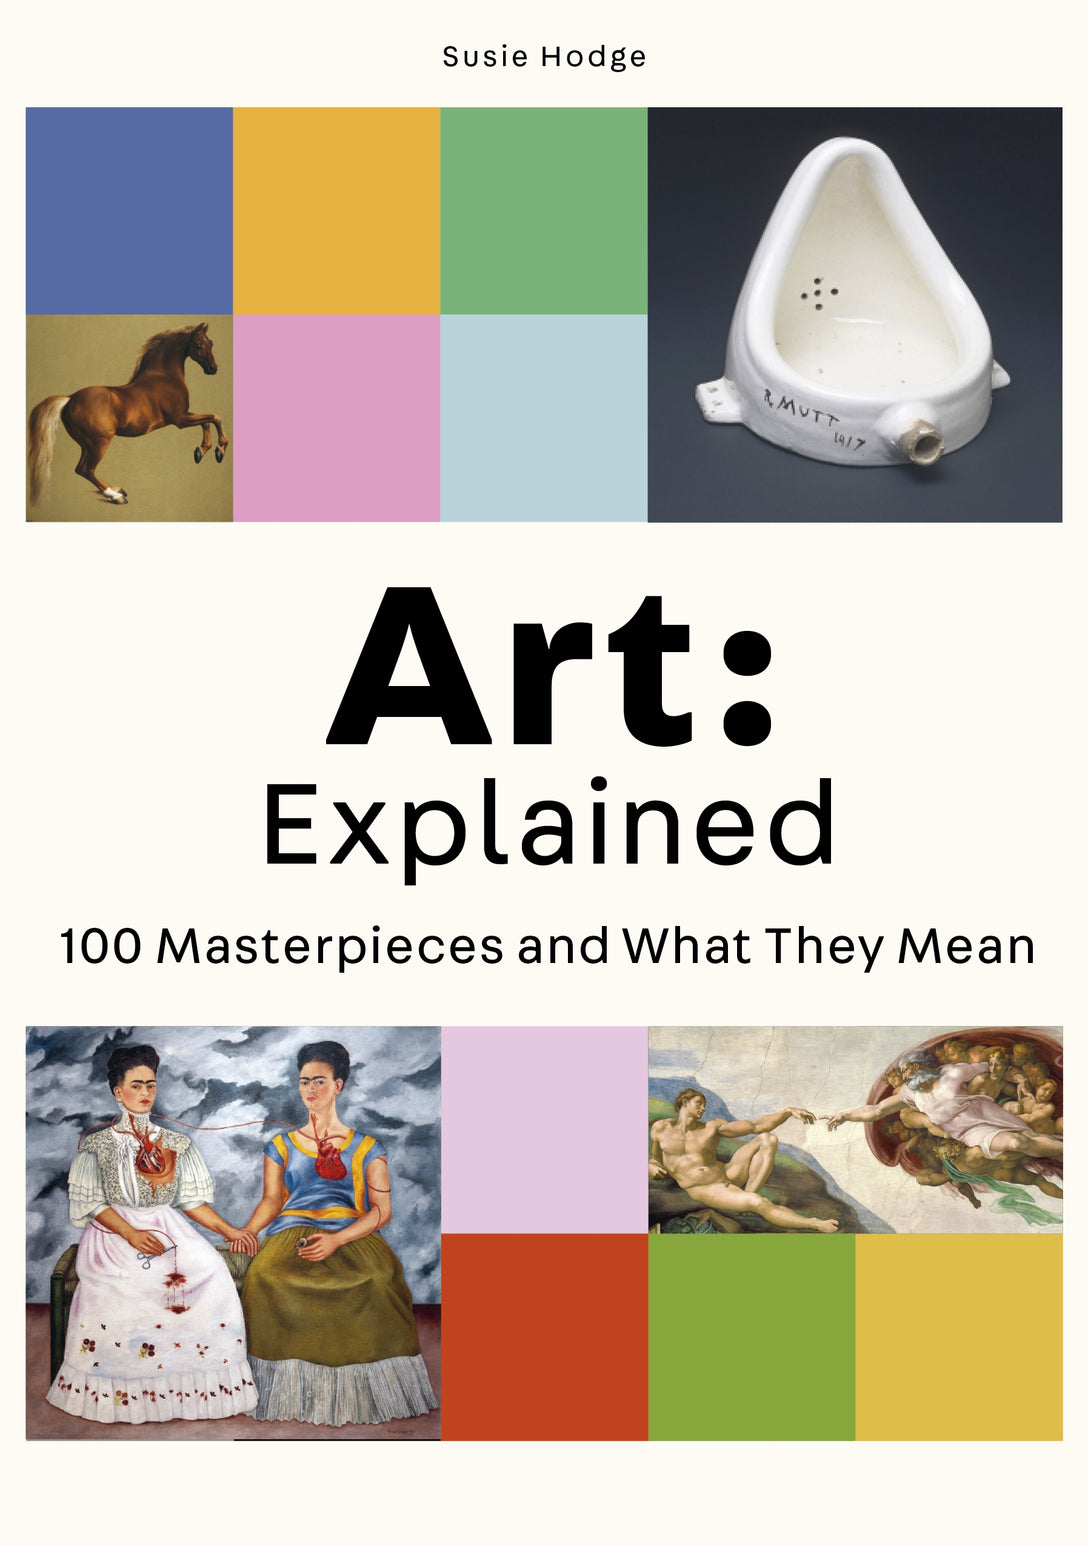 Art: Explained by Susie Hodge